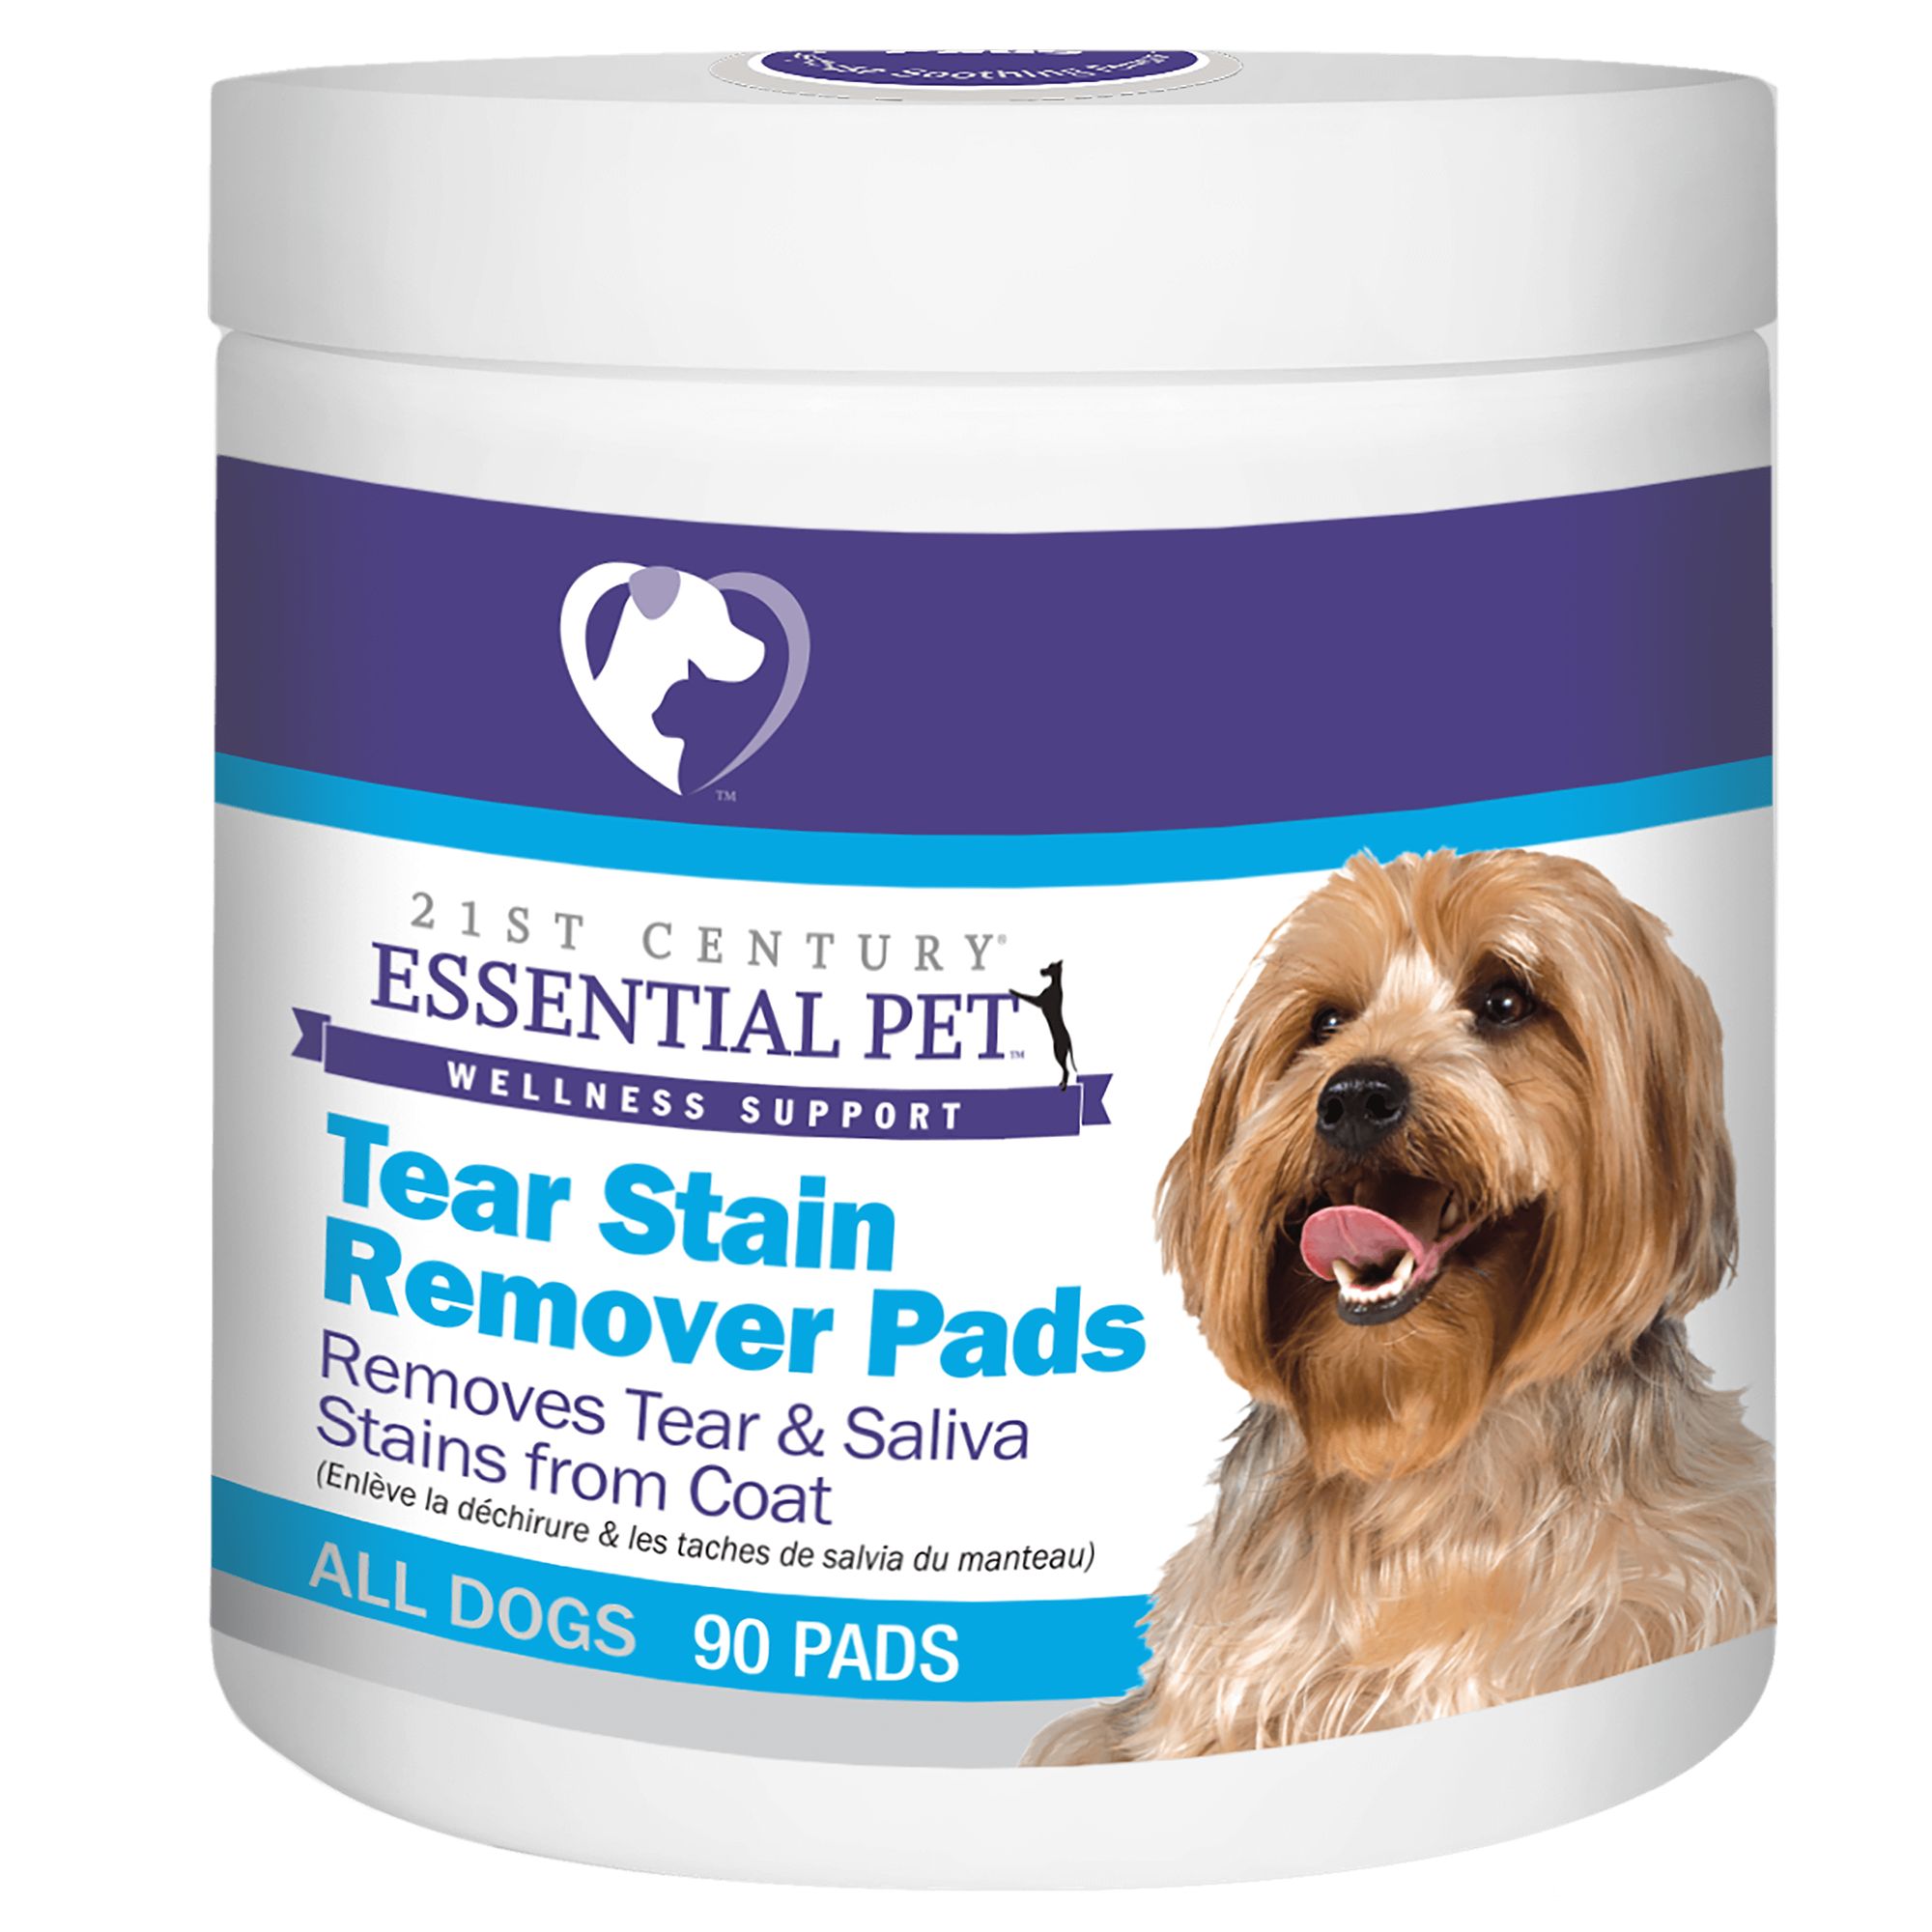 tear stain remover for dogs